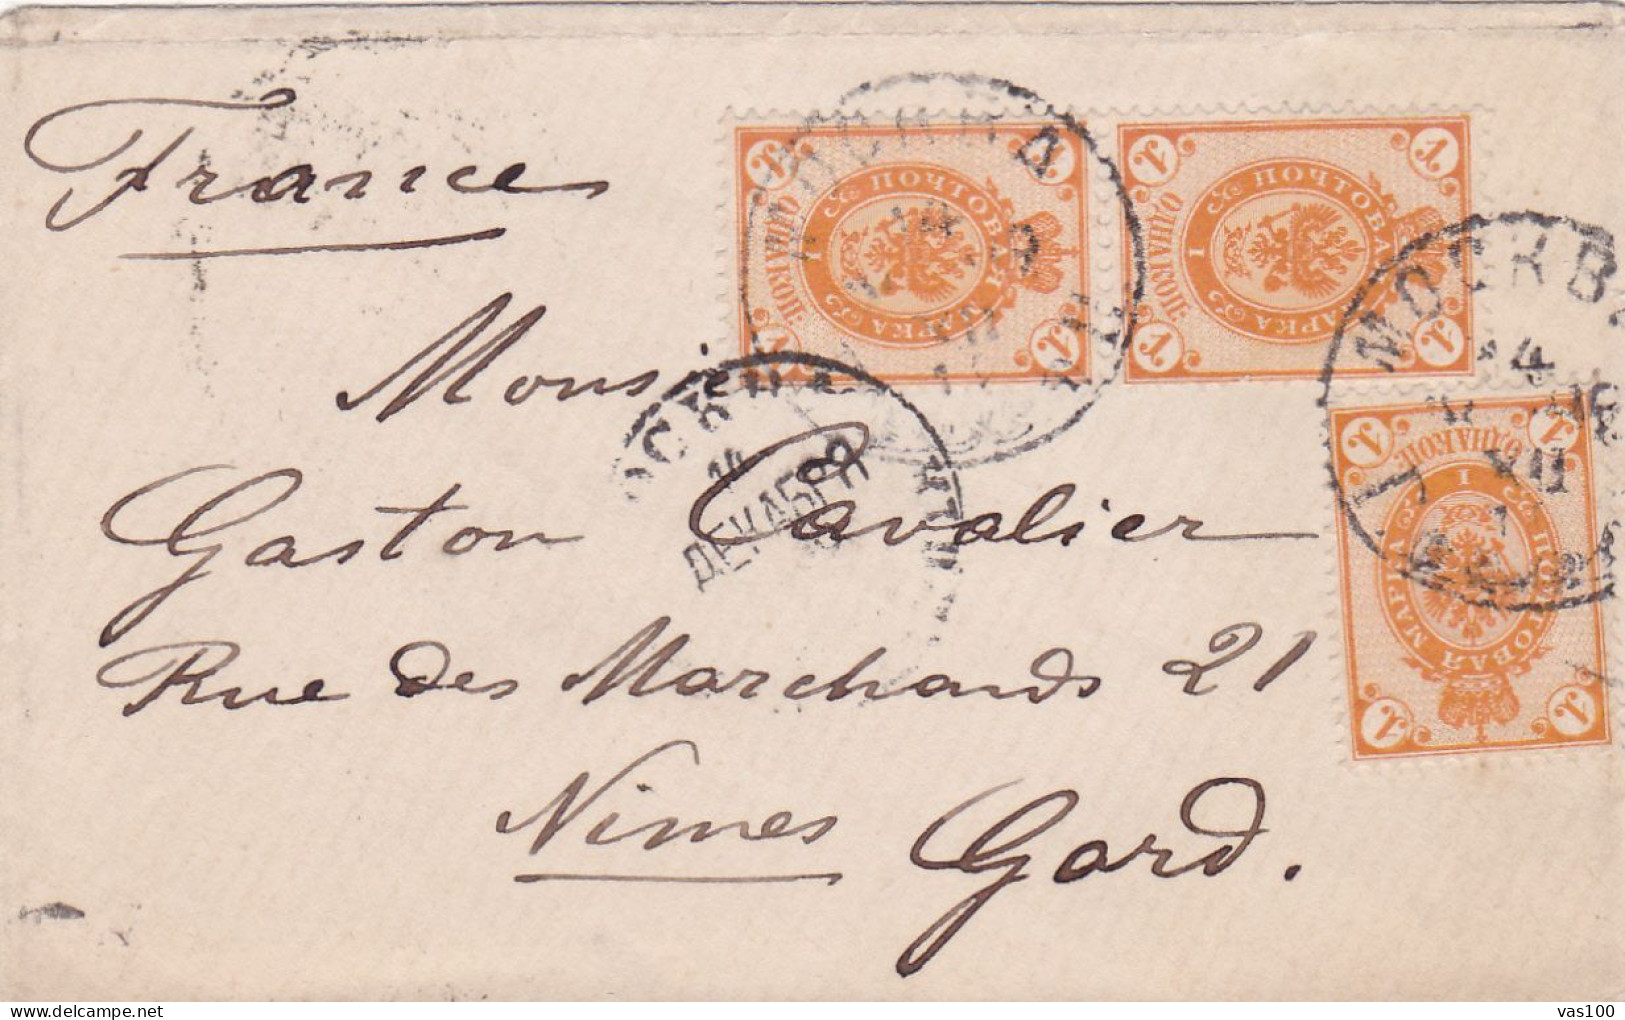 RUSSIA - Postal History - COVER To FRANCE 1891 NIMES - Covers & Documents